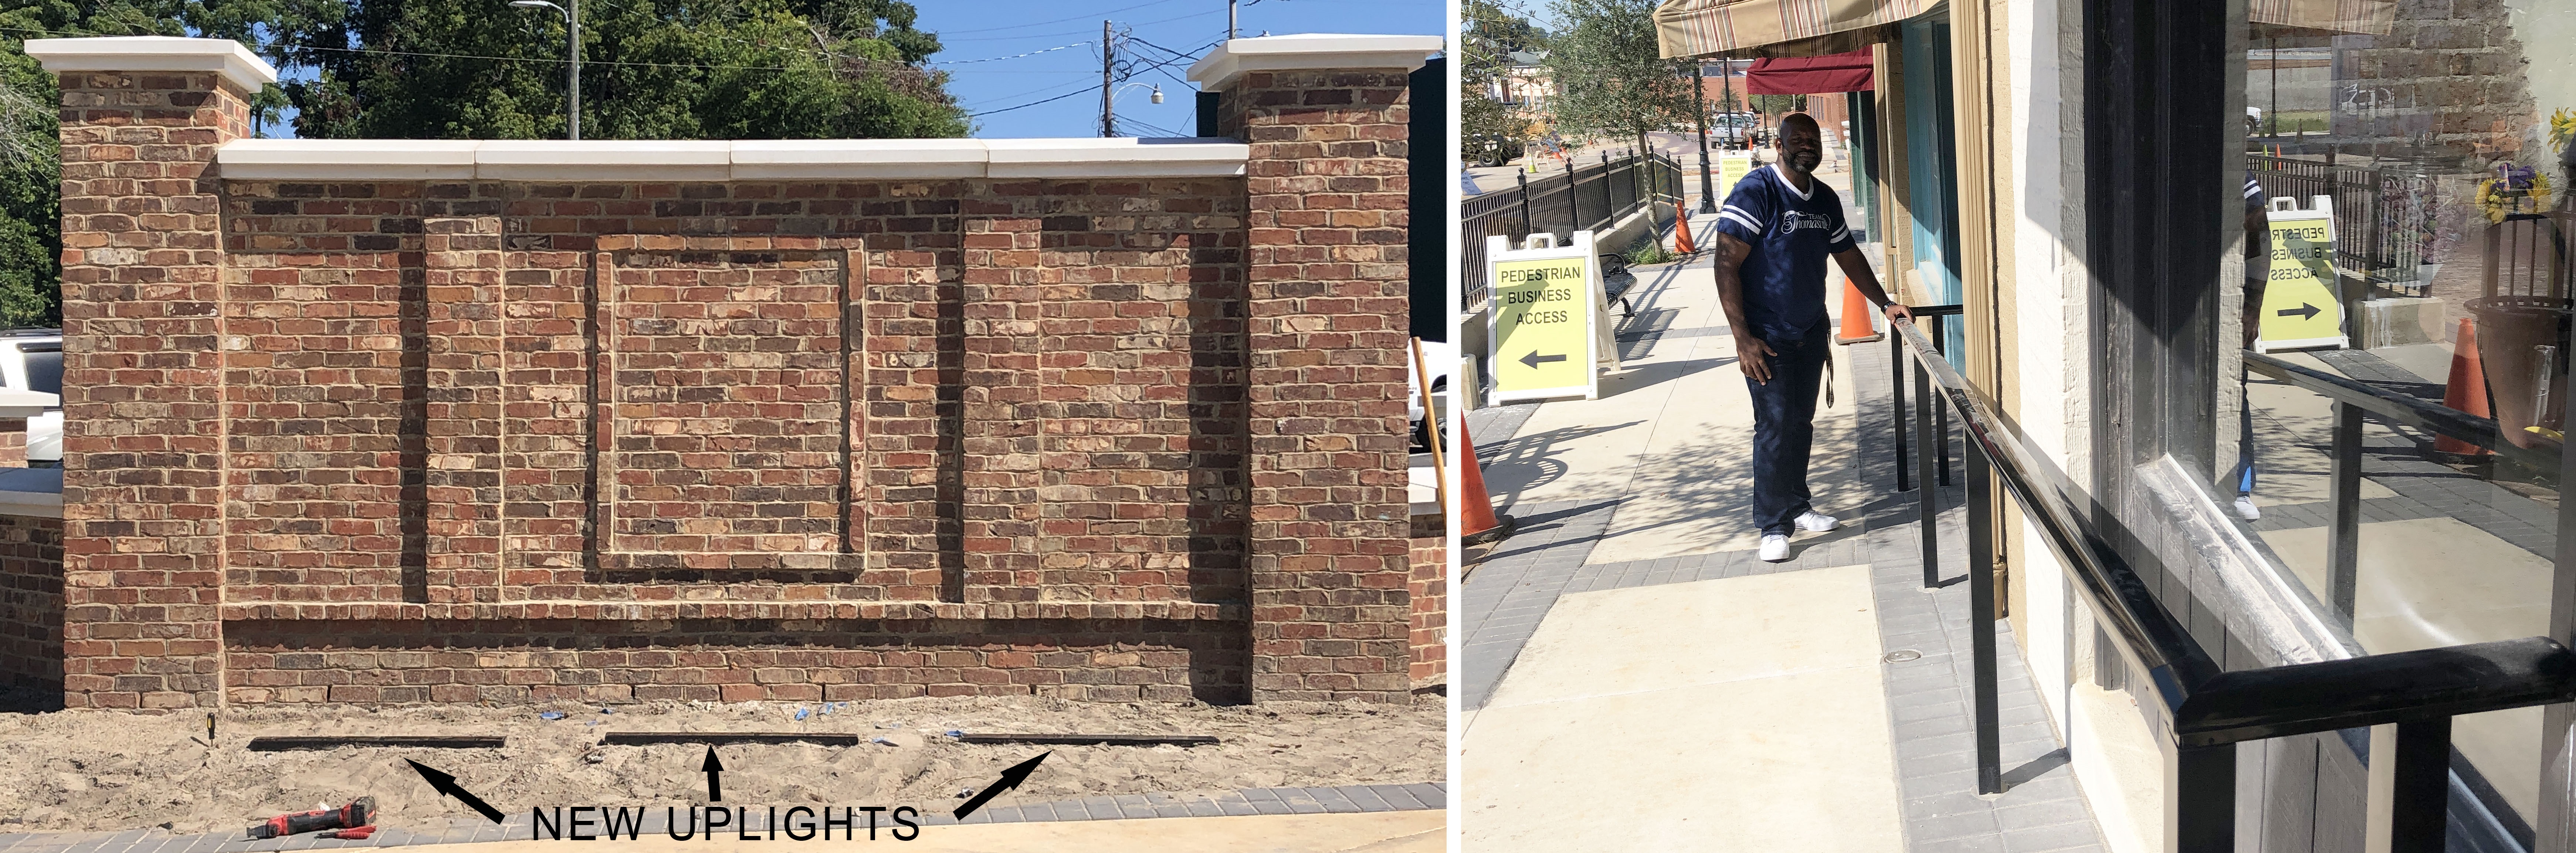 Lights installed to illuminate commemorative wall and hand rails installed on north side of 200 block of West Jackson St for pedestrian safety